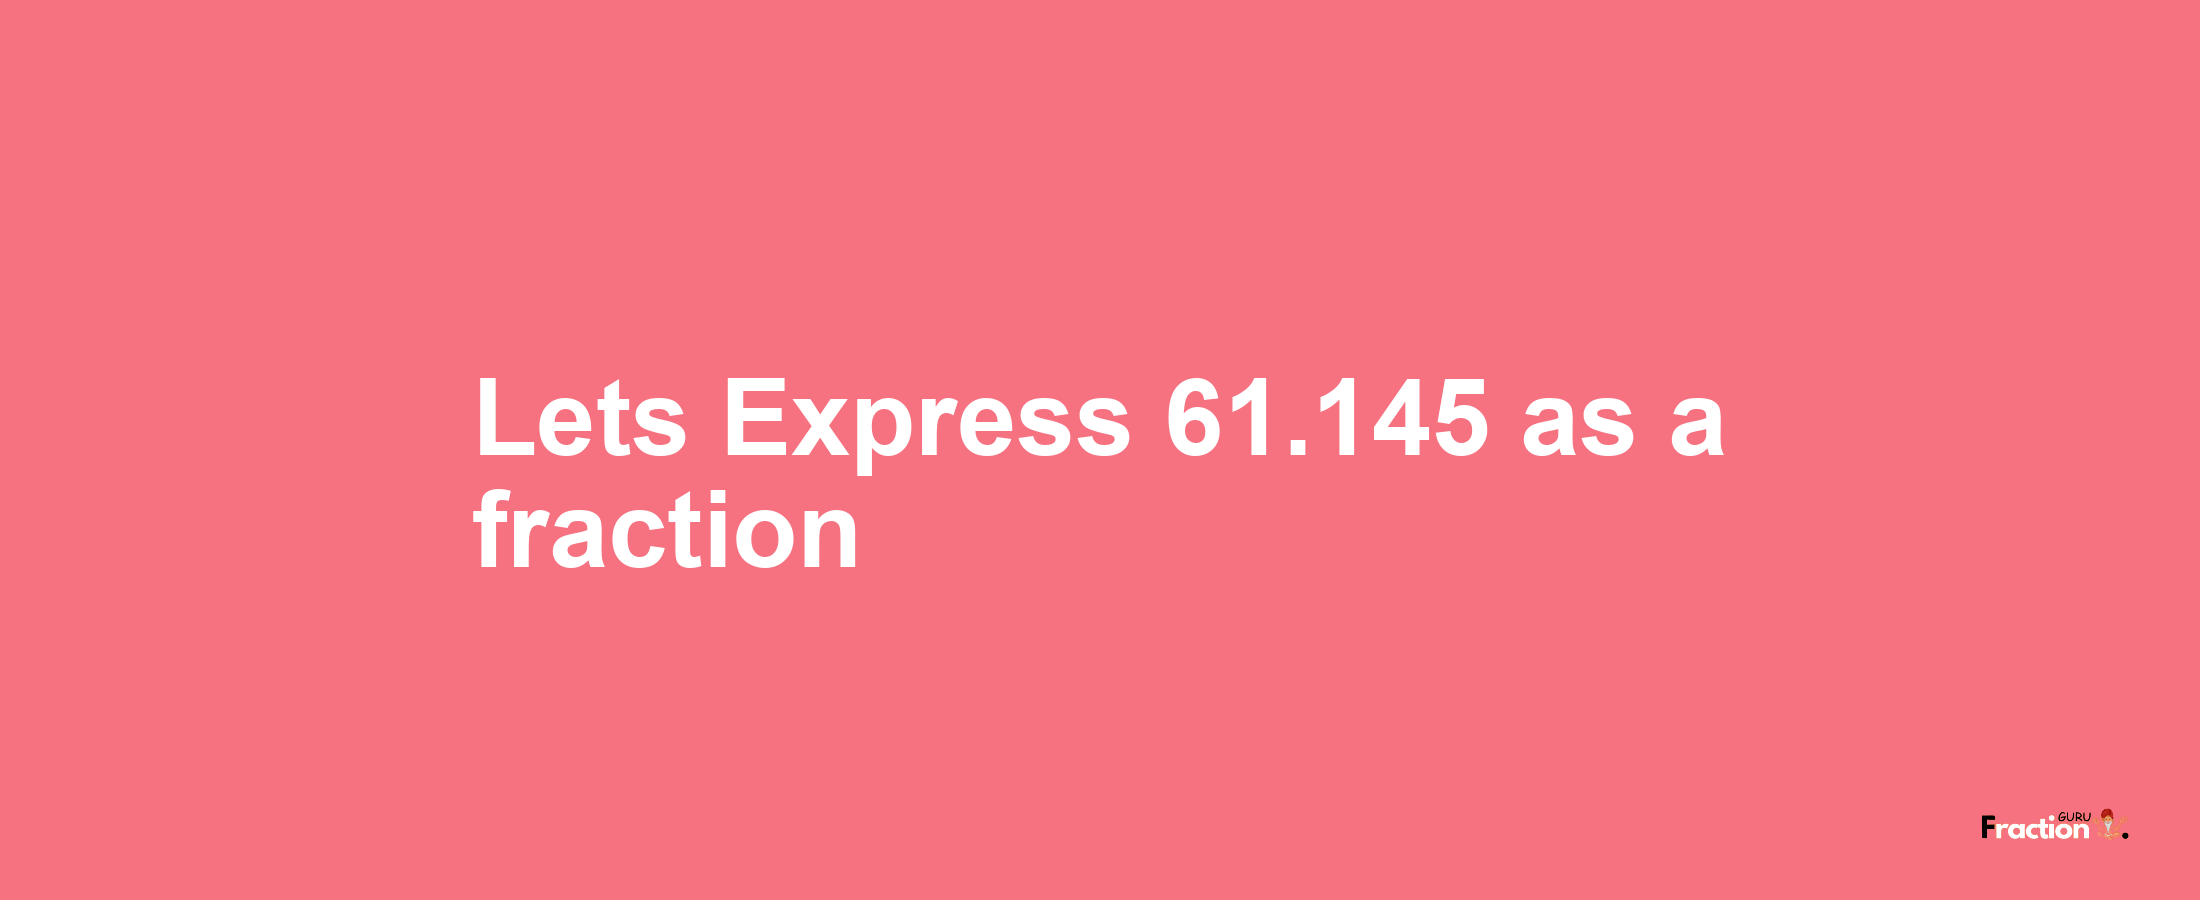 Lets Express 61.145 as afraction